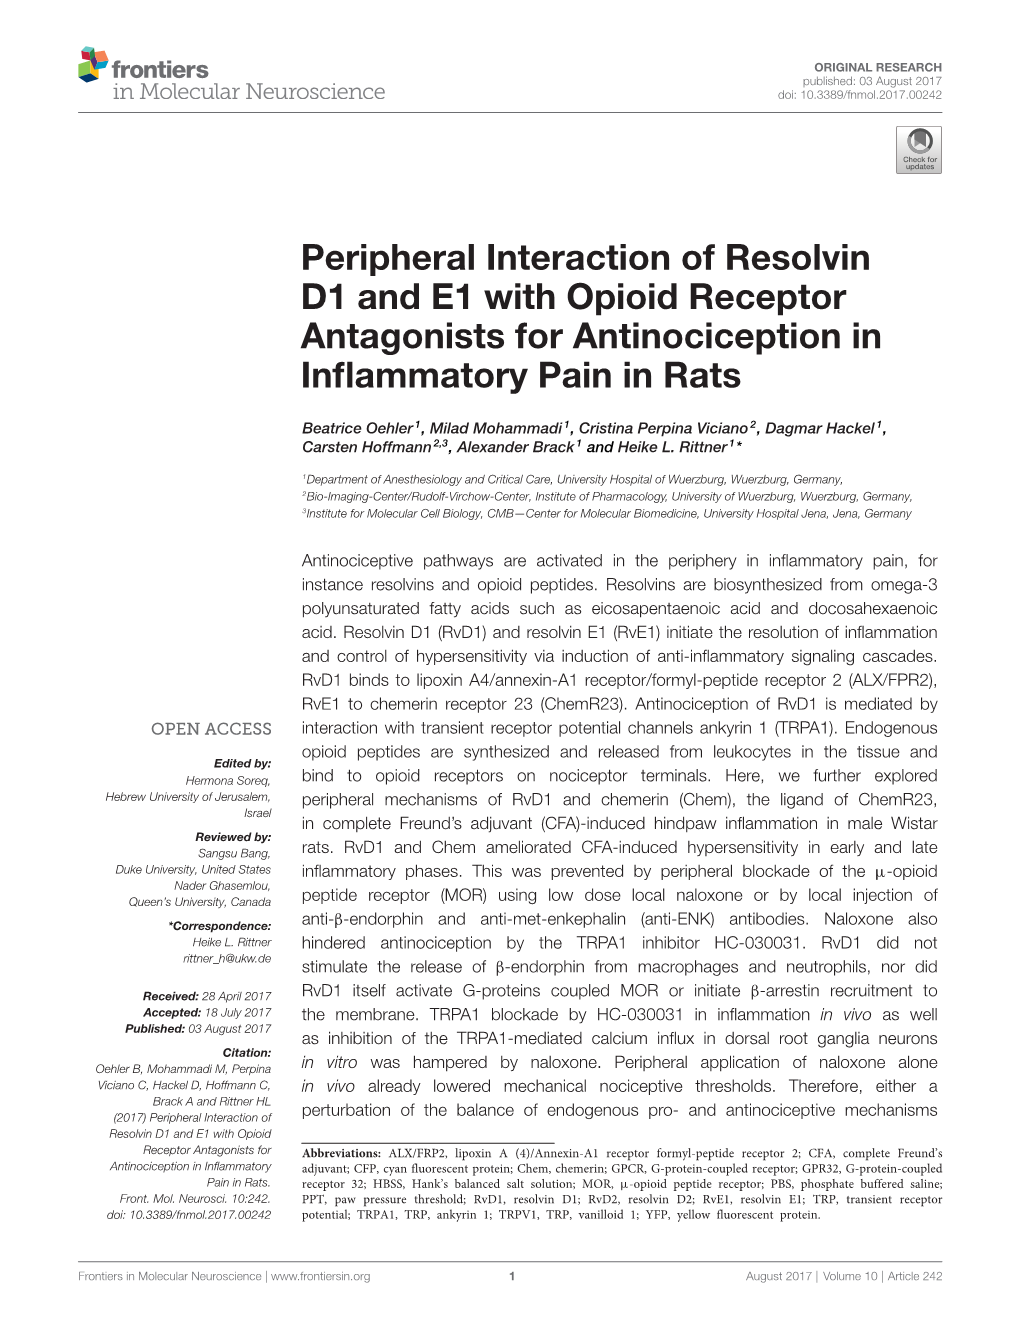 Peripheral Interaction of Resolvin D1 and E1 with Opioid Receptor Antagonists for Antinociception in Inﬂammatory Pain in Rats